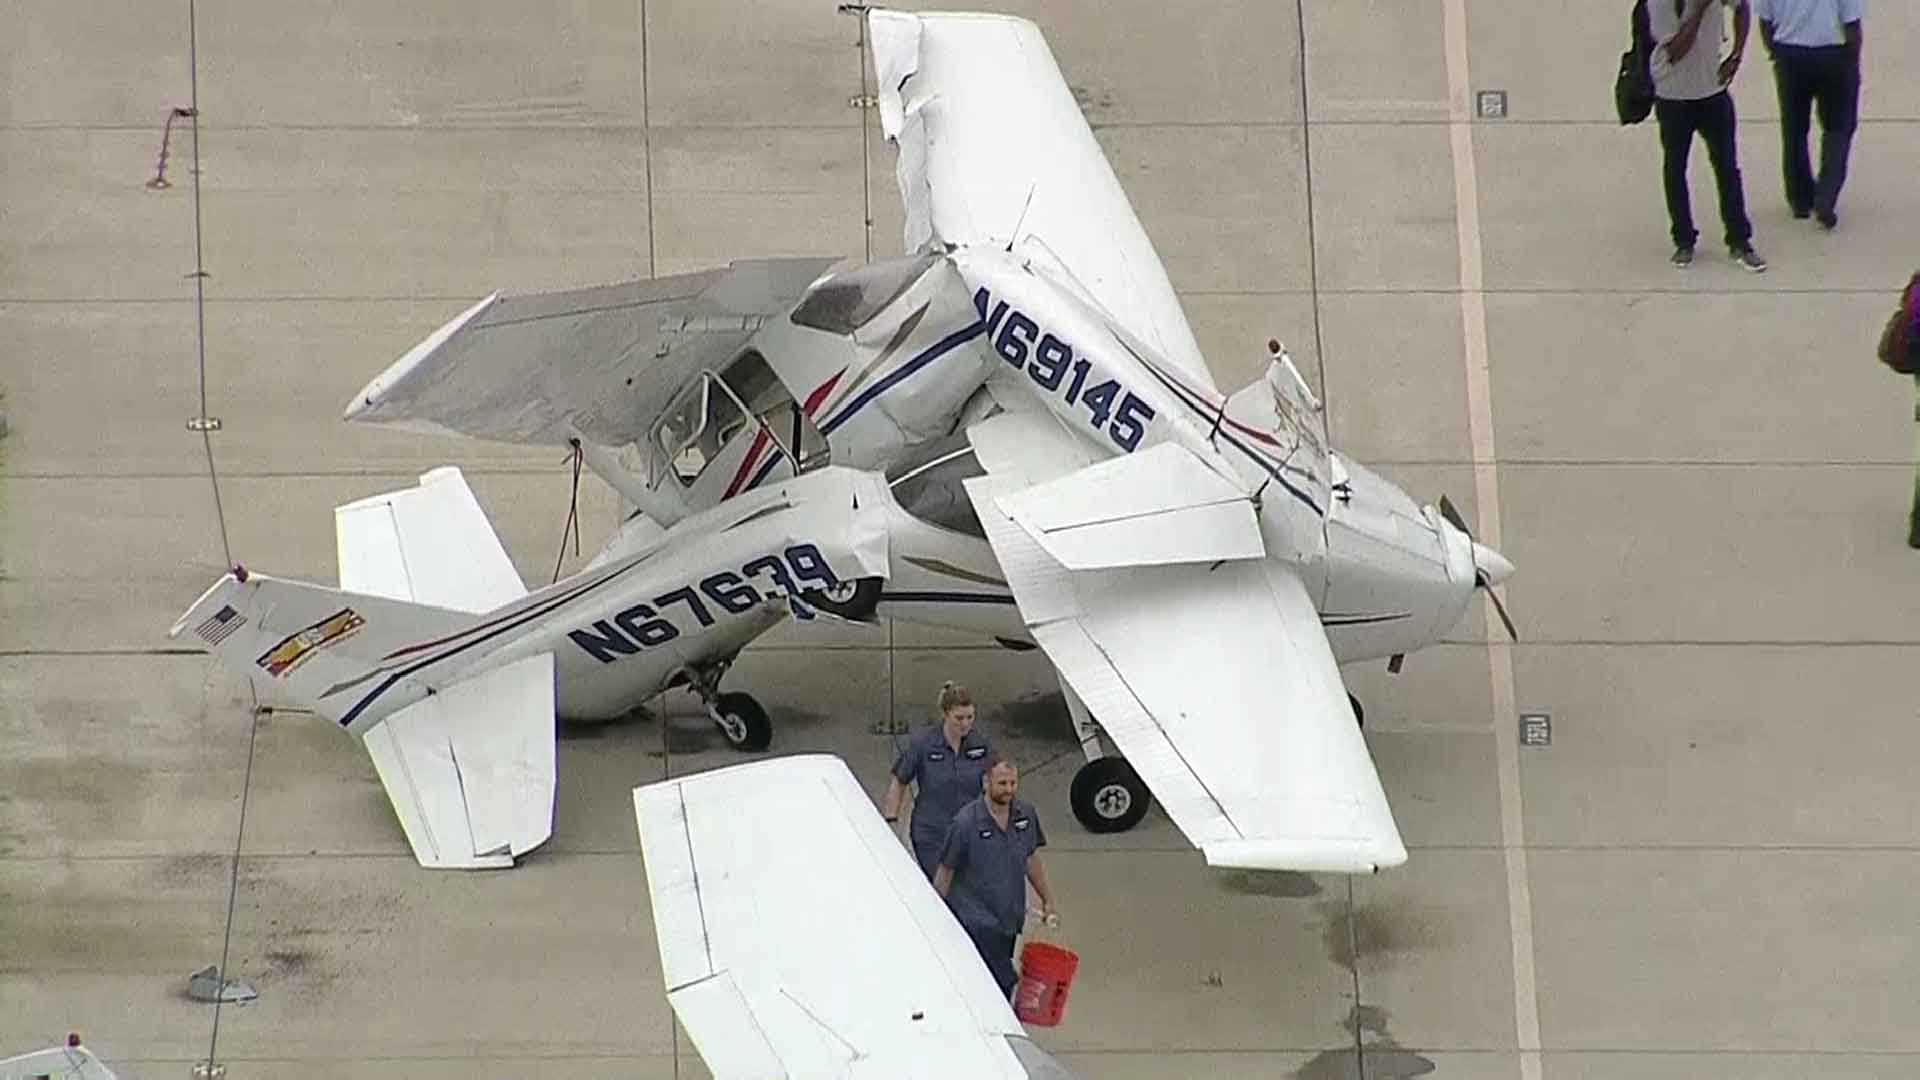 Planes Flipped, Hangars Damaged After Storms in Denton